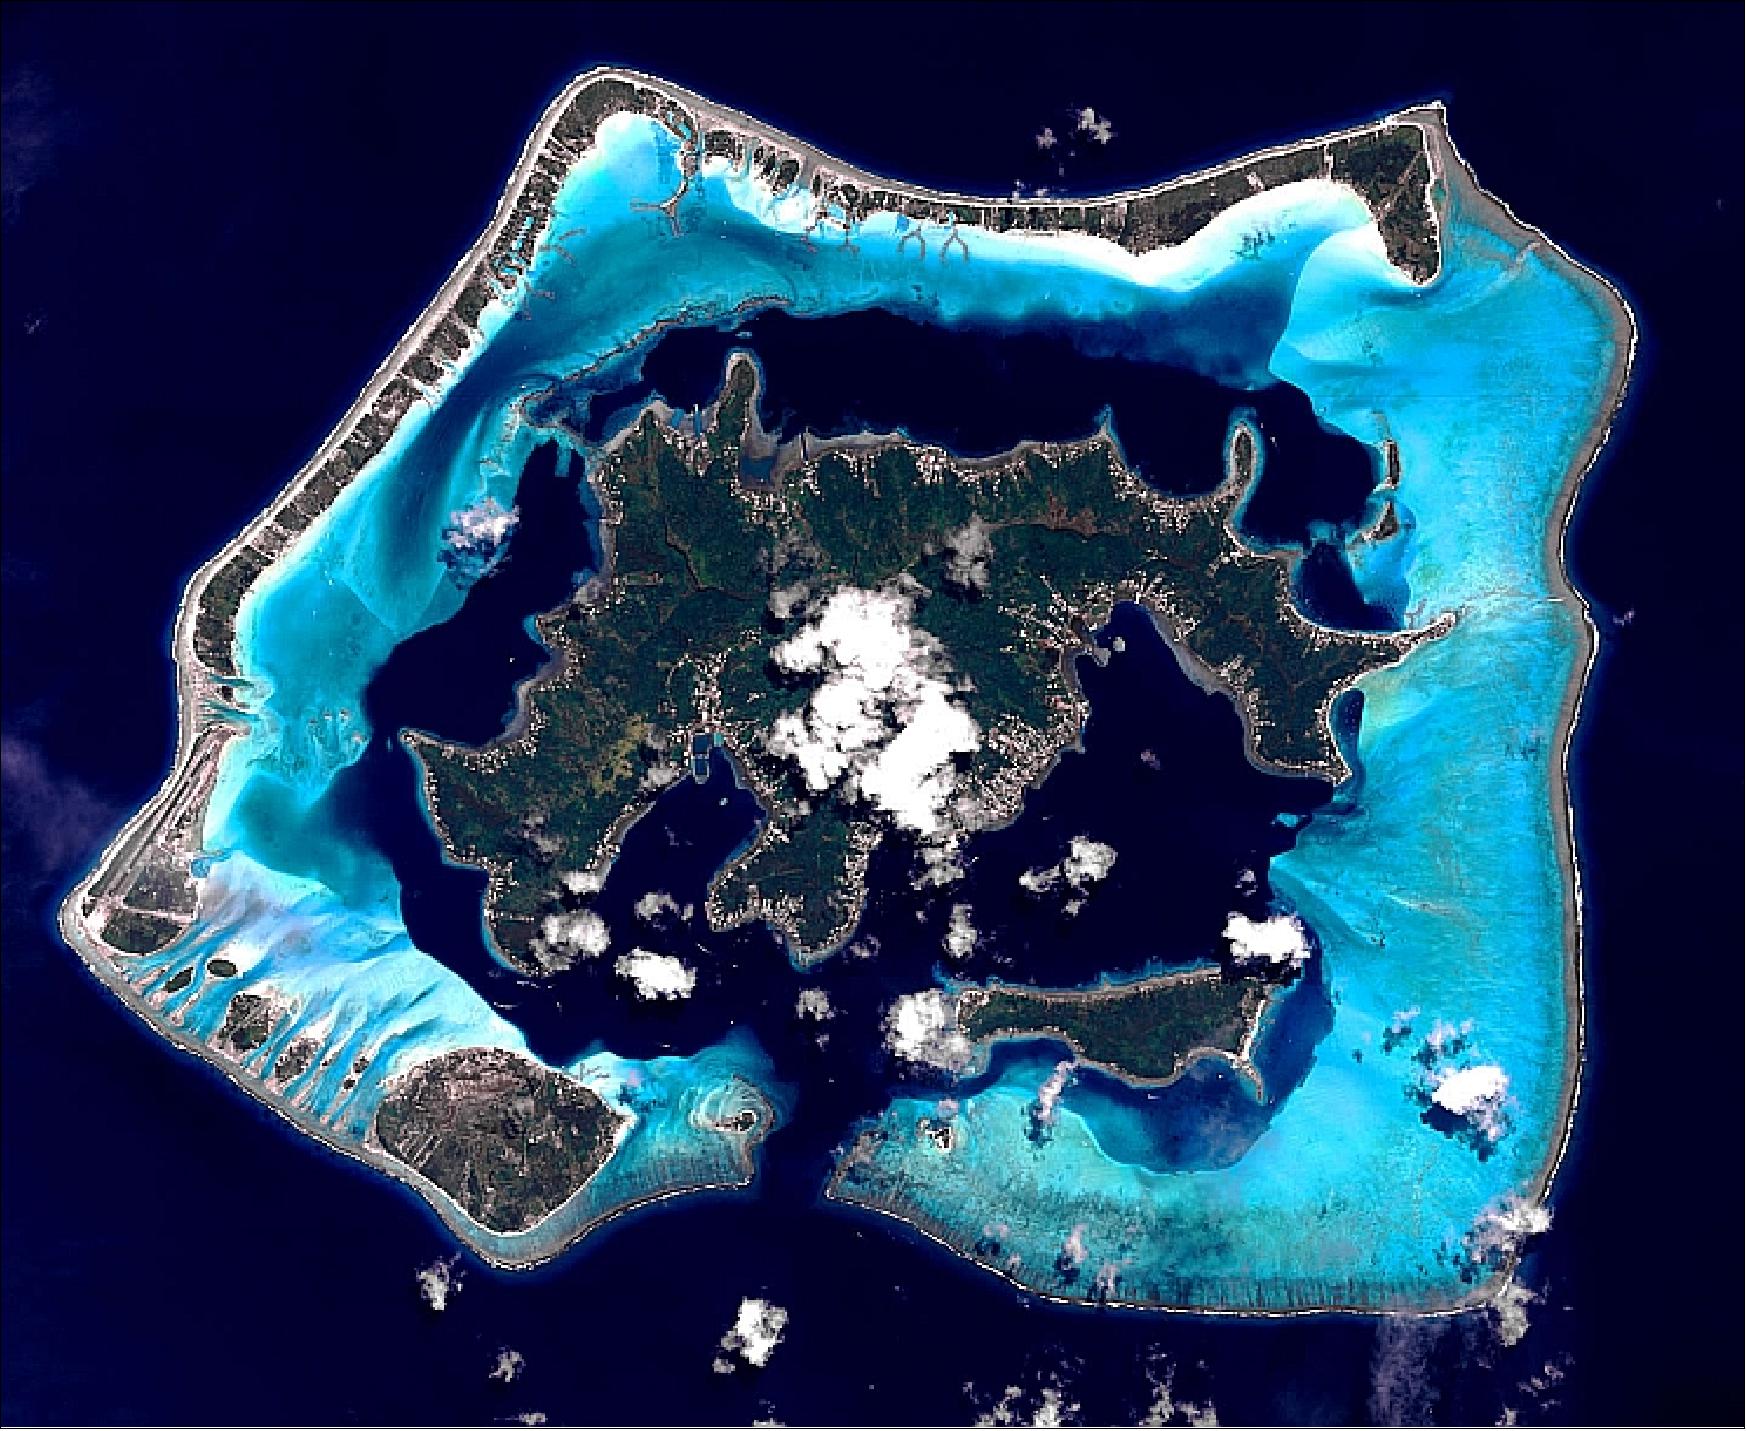 Figure 36: Image of Bora Bora Island in Polynesia observed by Pleiades-1A on January 3, 2012 (image credit: CNES) 70)